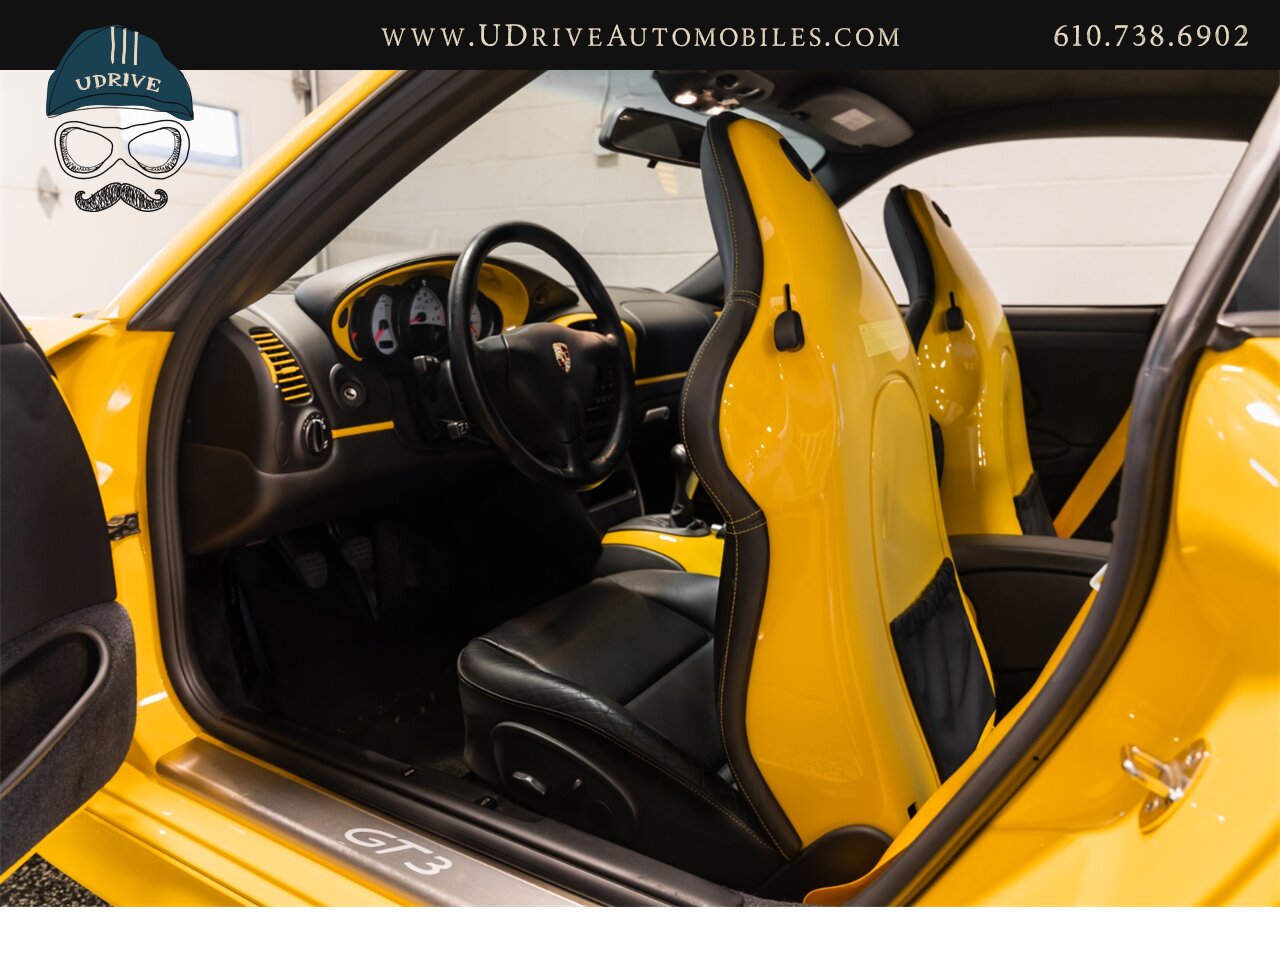 2005 Porsche 911 GT3 996 Speed Yellow Sport Seats Pntd Hardbacks  Pntd Console Deviating Stitch Yellow Accents Throughout - Photo 32 - West Chester, PA 19382